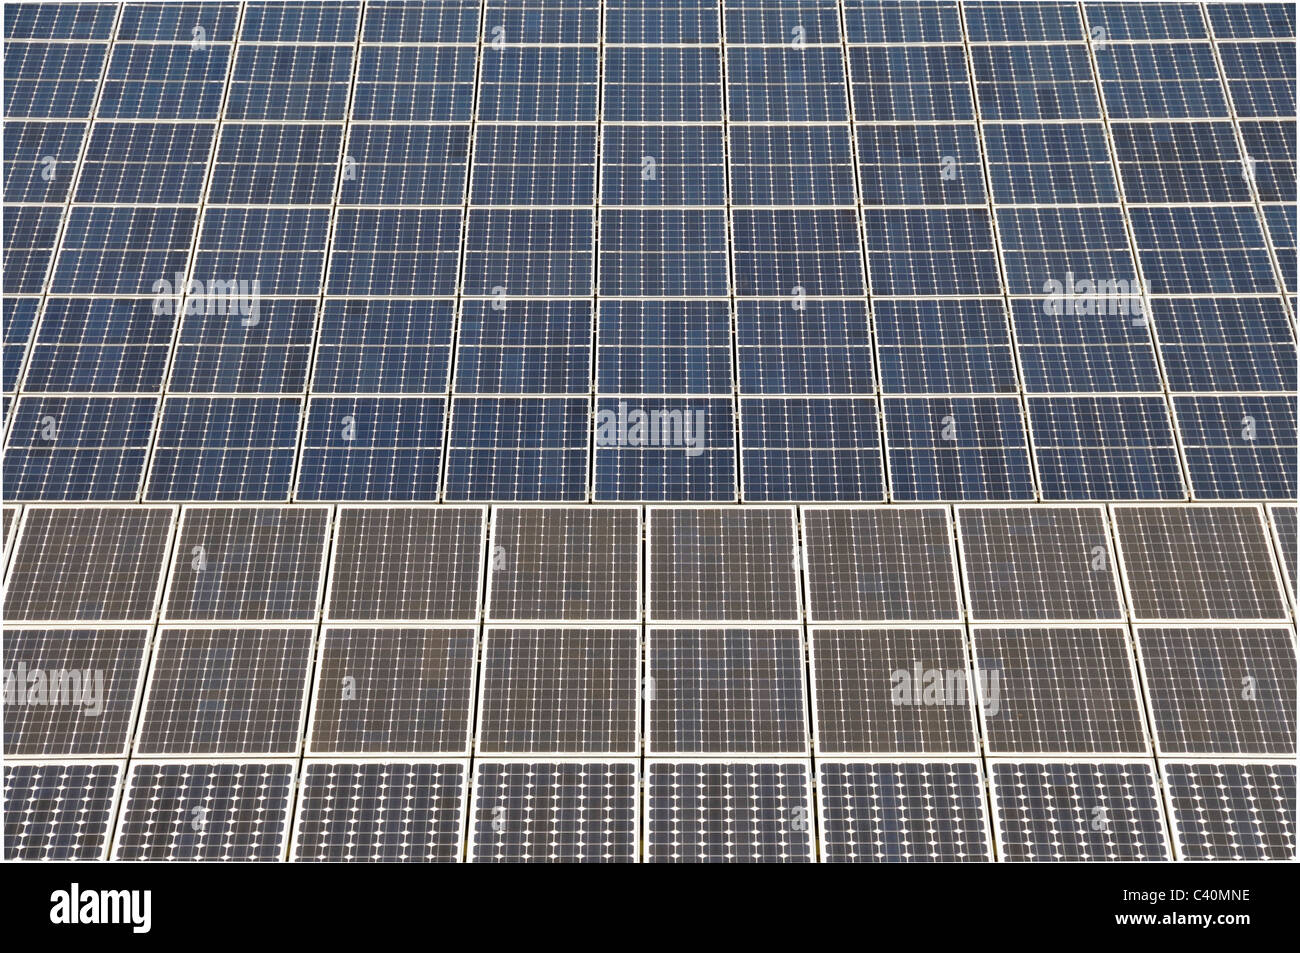 Roof, electricity, power production, energy source, energy supply, photovoltaic, complex, modules, solar arrangement, solar ener Stock Photo